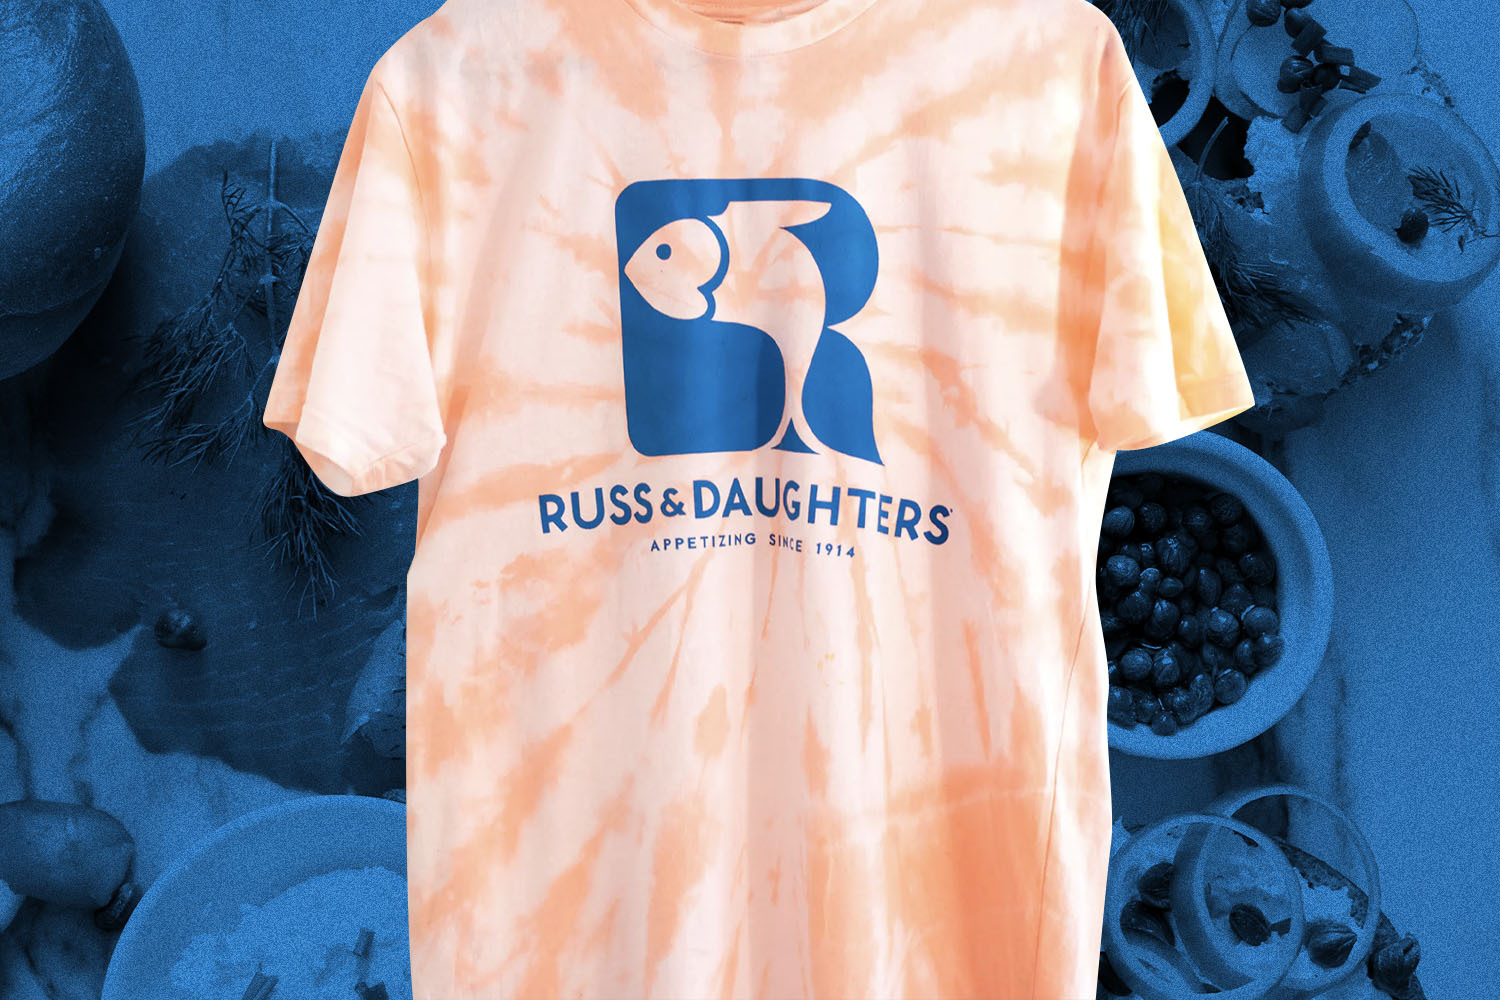 The Russ & Daughters/Jake Gyllenhaal collaborative t-shirt will raise money for the Independent Restaurant Coalition.